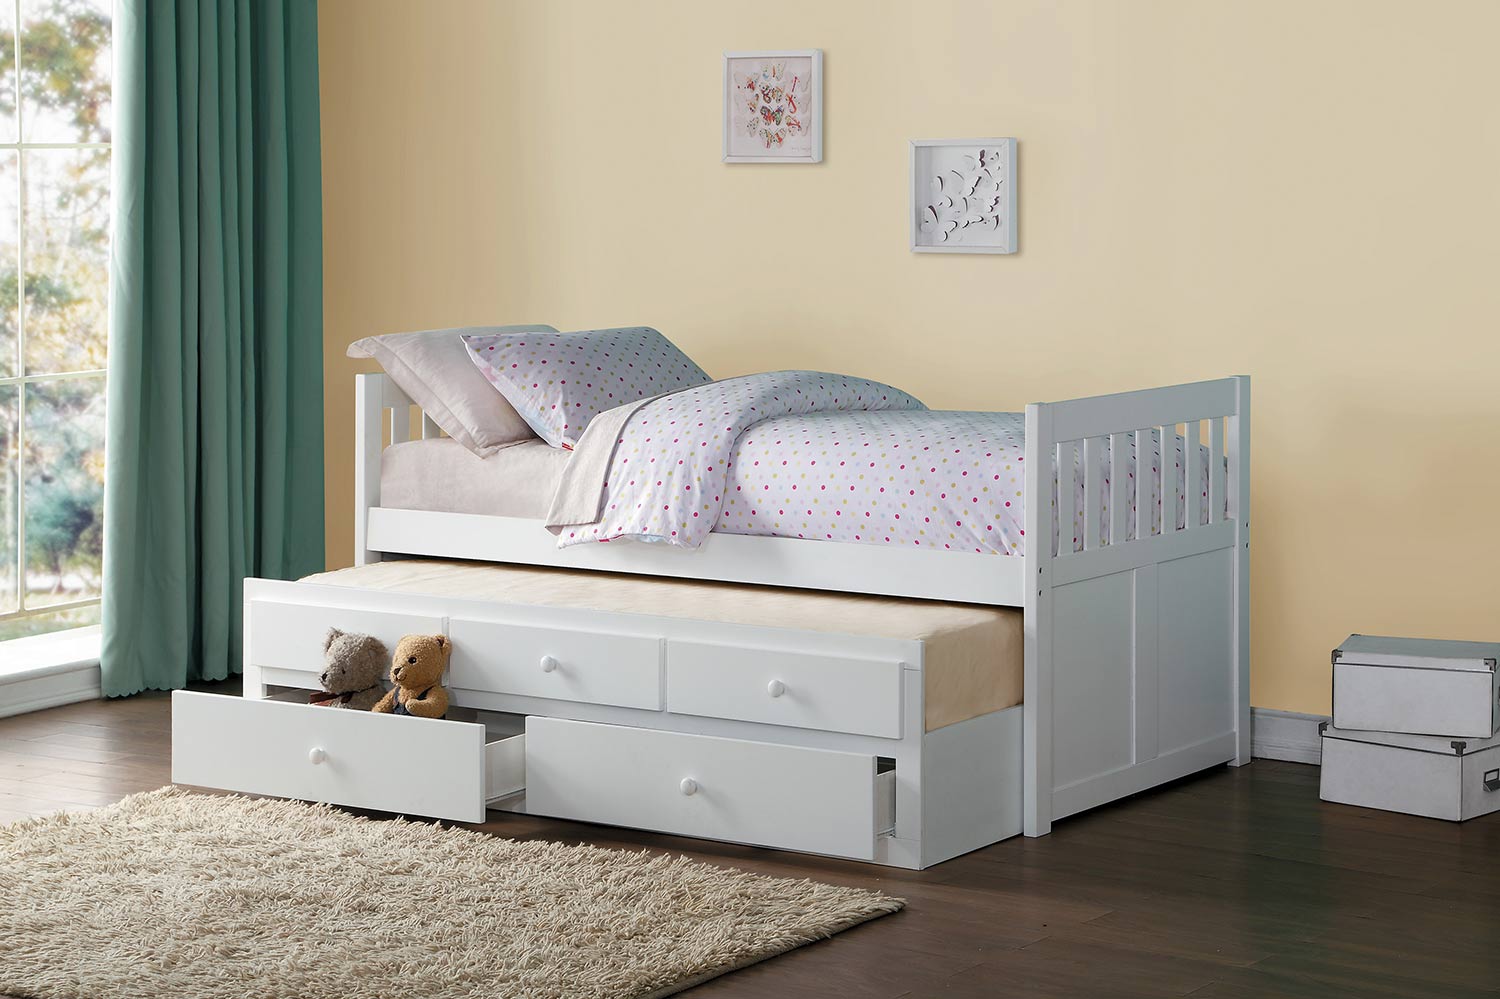 Homelegance Galen Twin Bed with Trundle and Two Storage Drawers - White